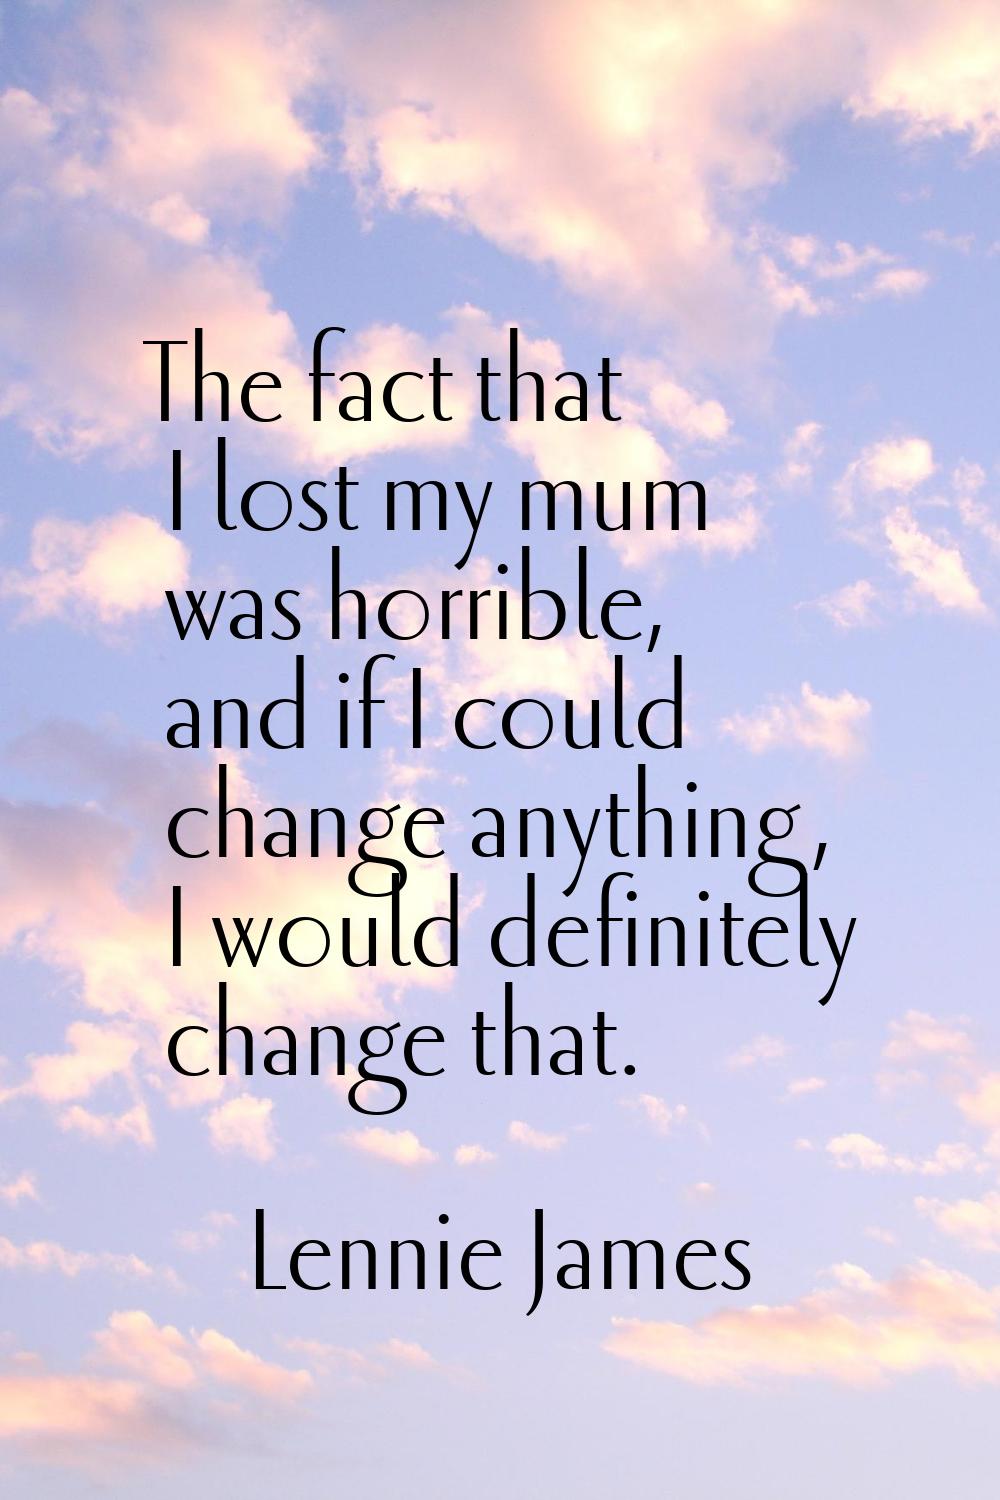 The fact that I lost my mum was horrible, and if I could change anything, I would definitely change